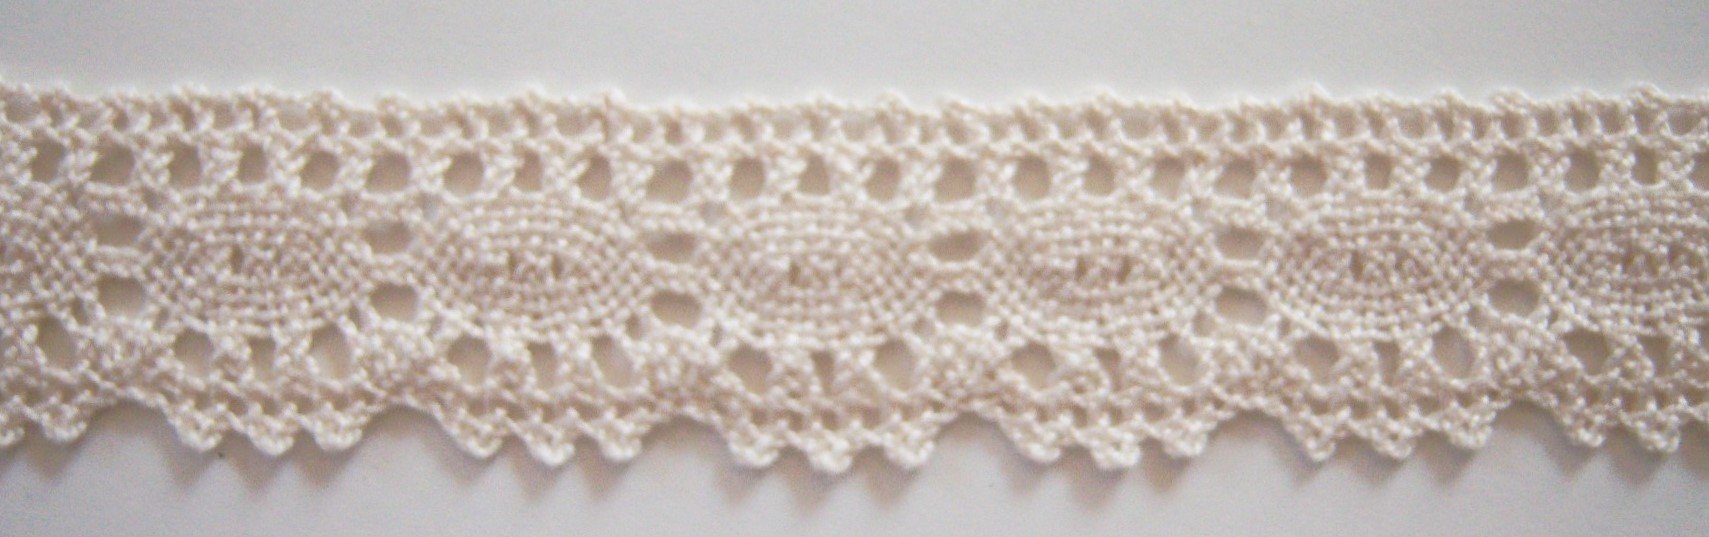 Natural 1 1/8" Cluny Lace